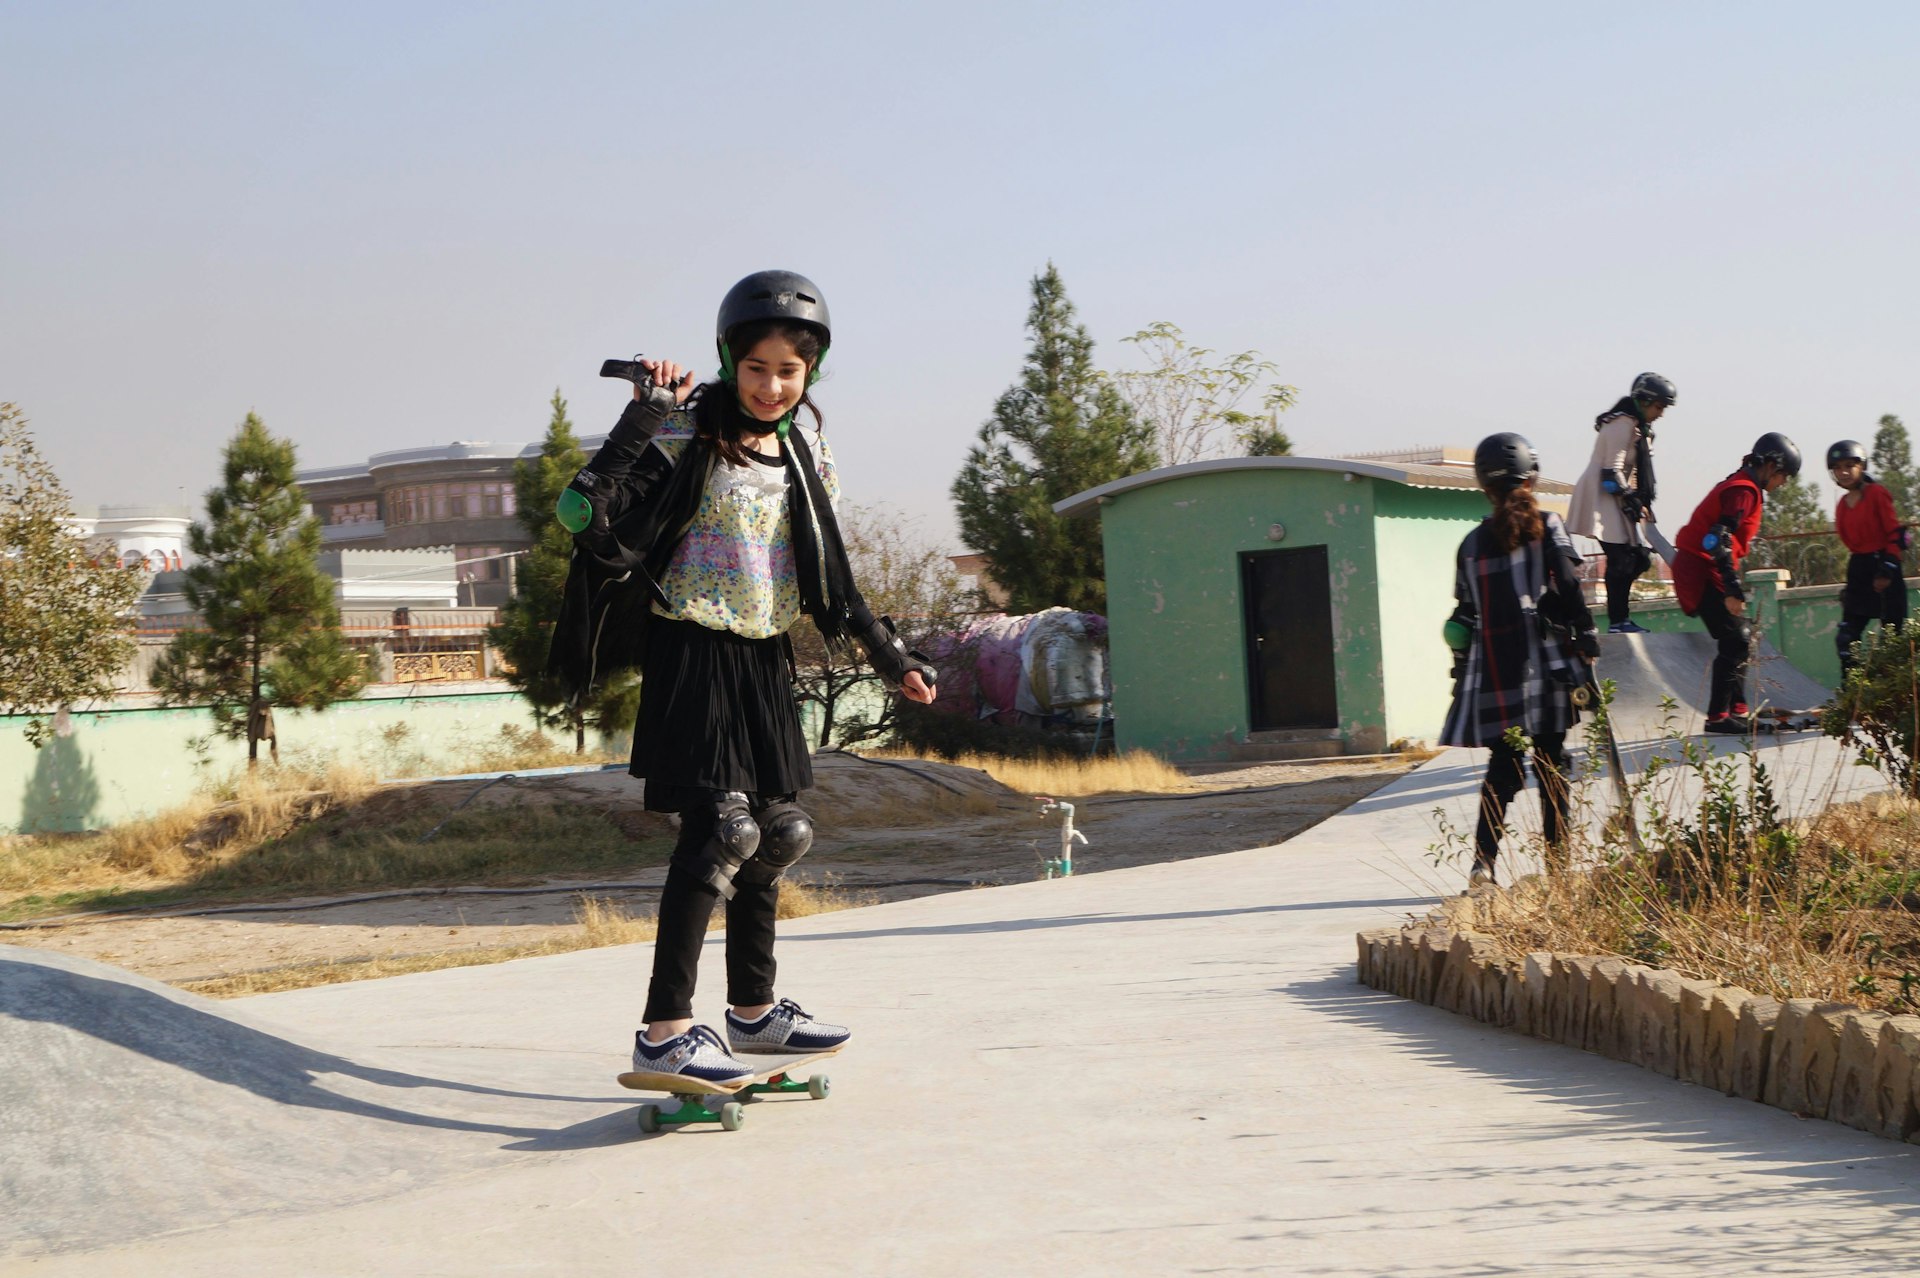 Skateistan Skate Schools are creating spaces for female equality around the world